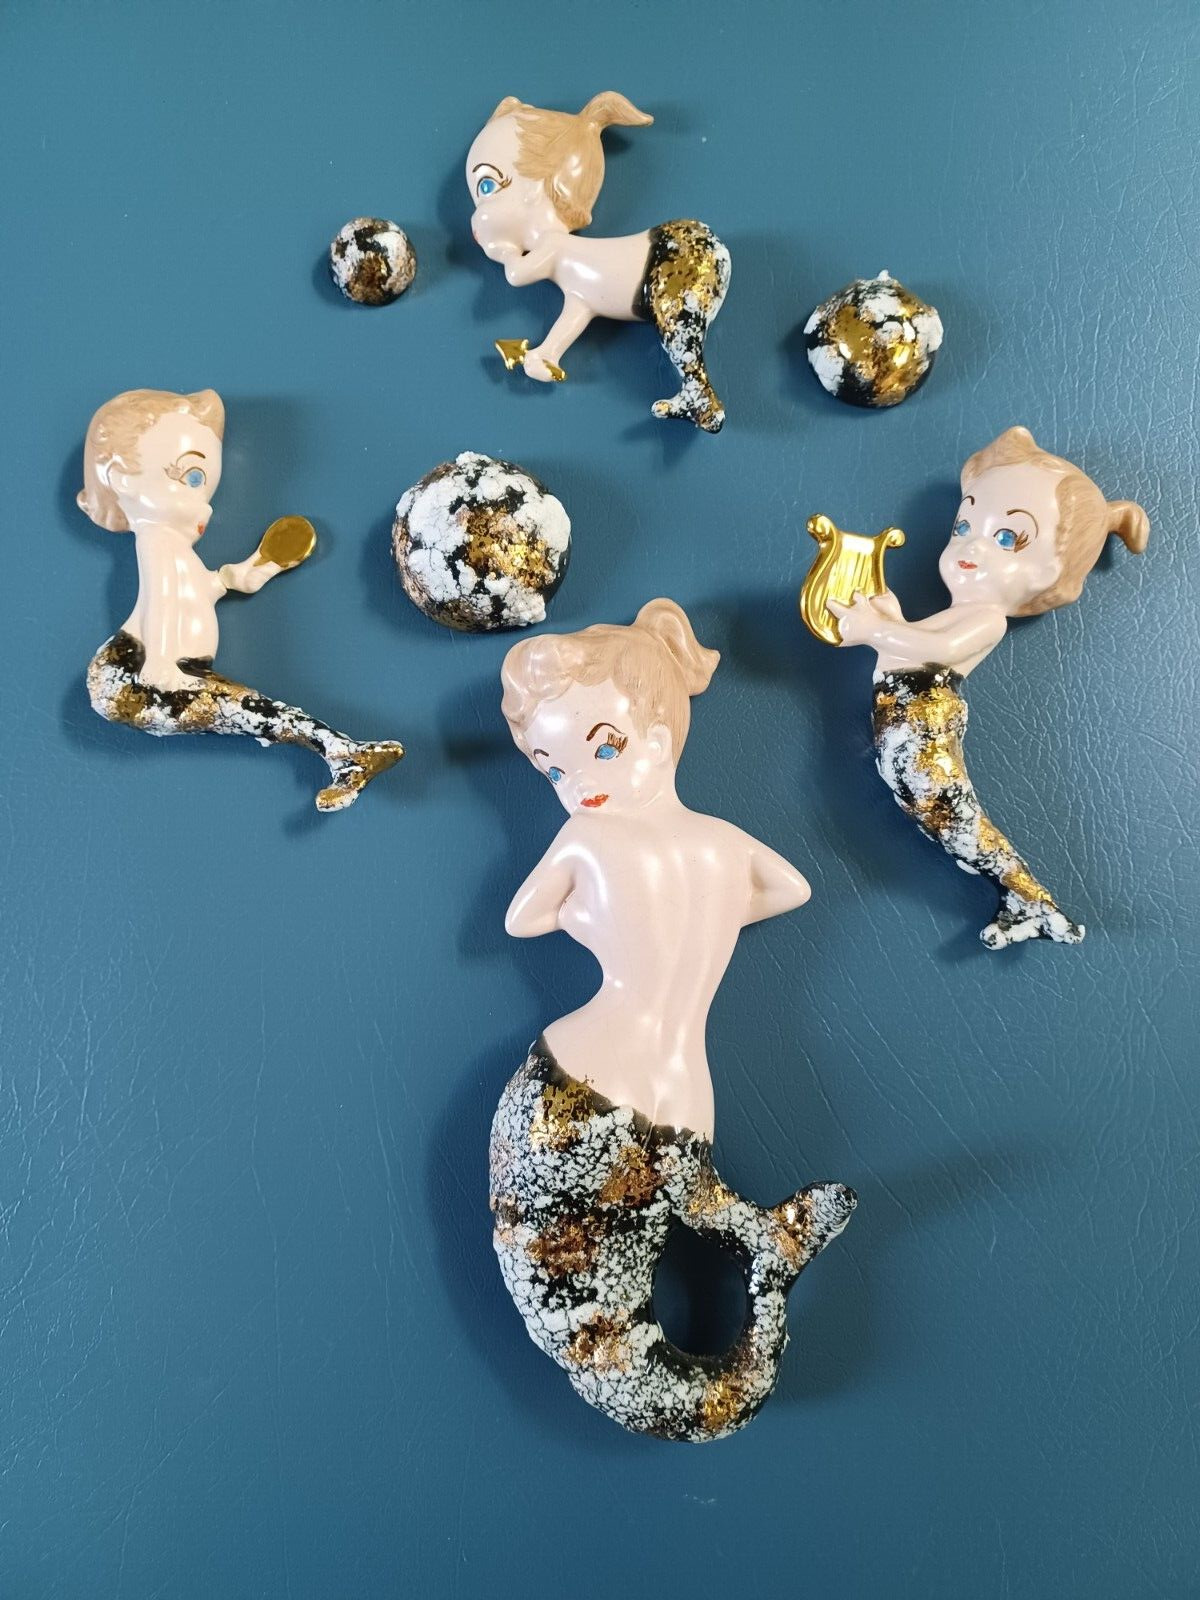 Vintage Ceramic  7 pc. Mermaid Mom with Babies and Bubbles Wall Plaque Set